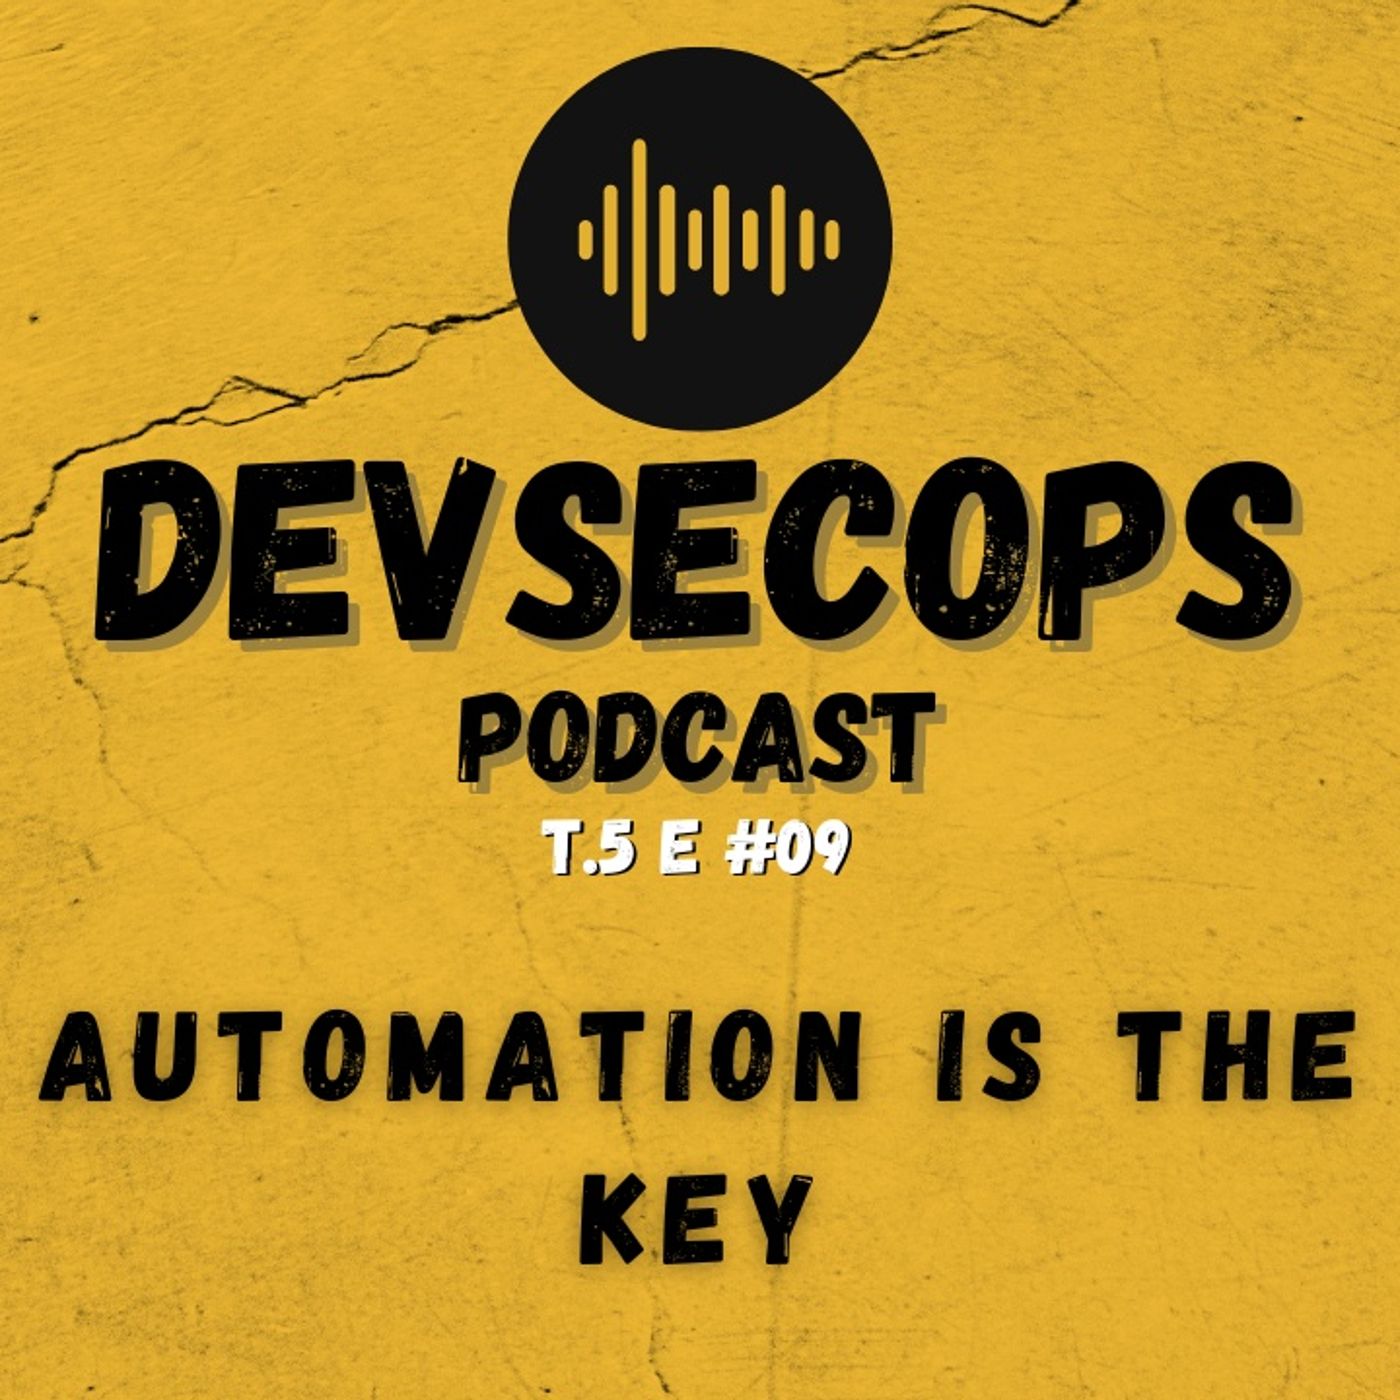 #05-09 - Automation is the key